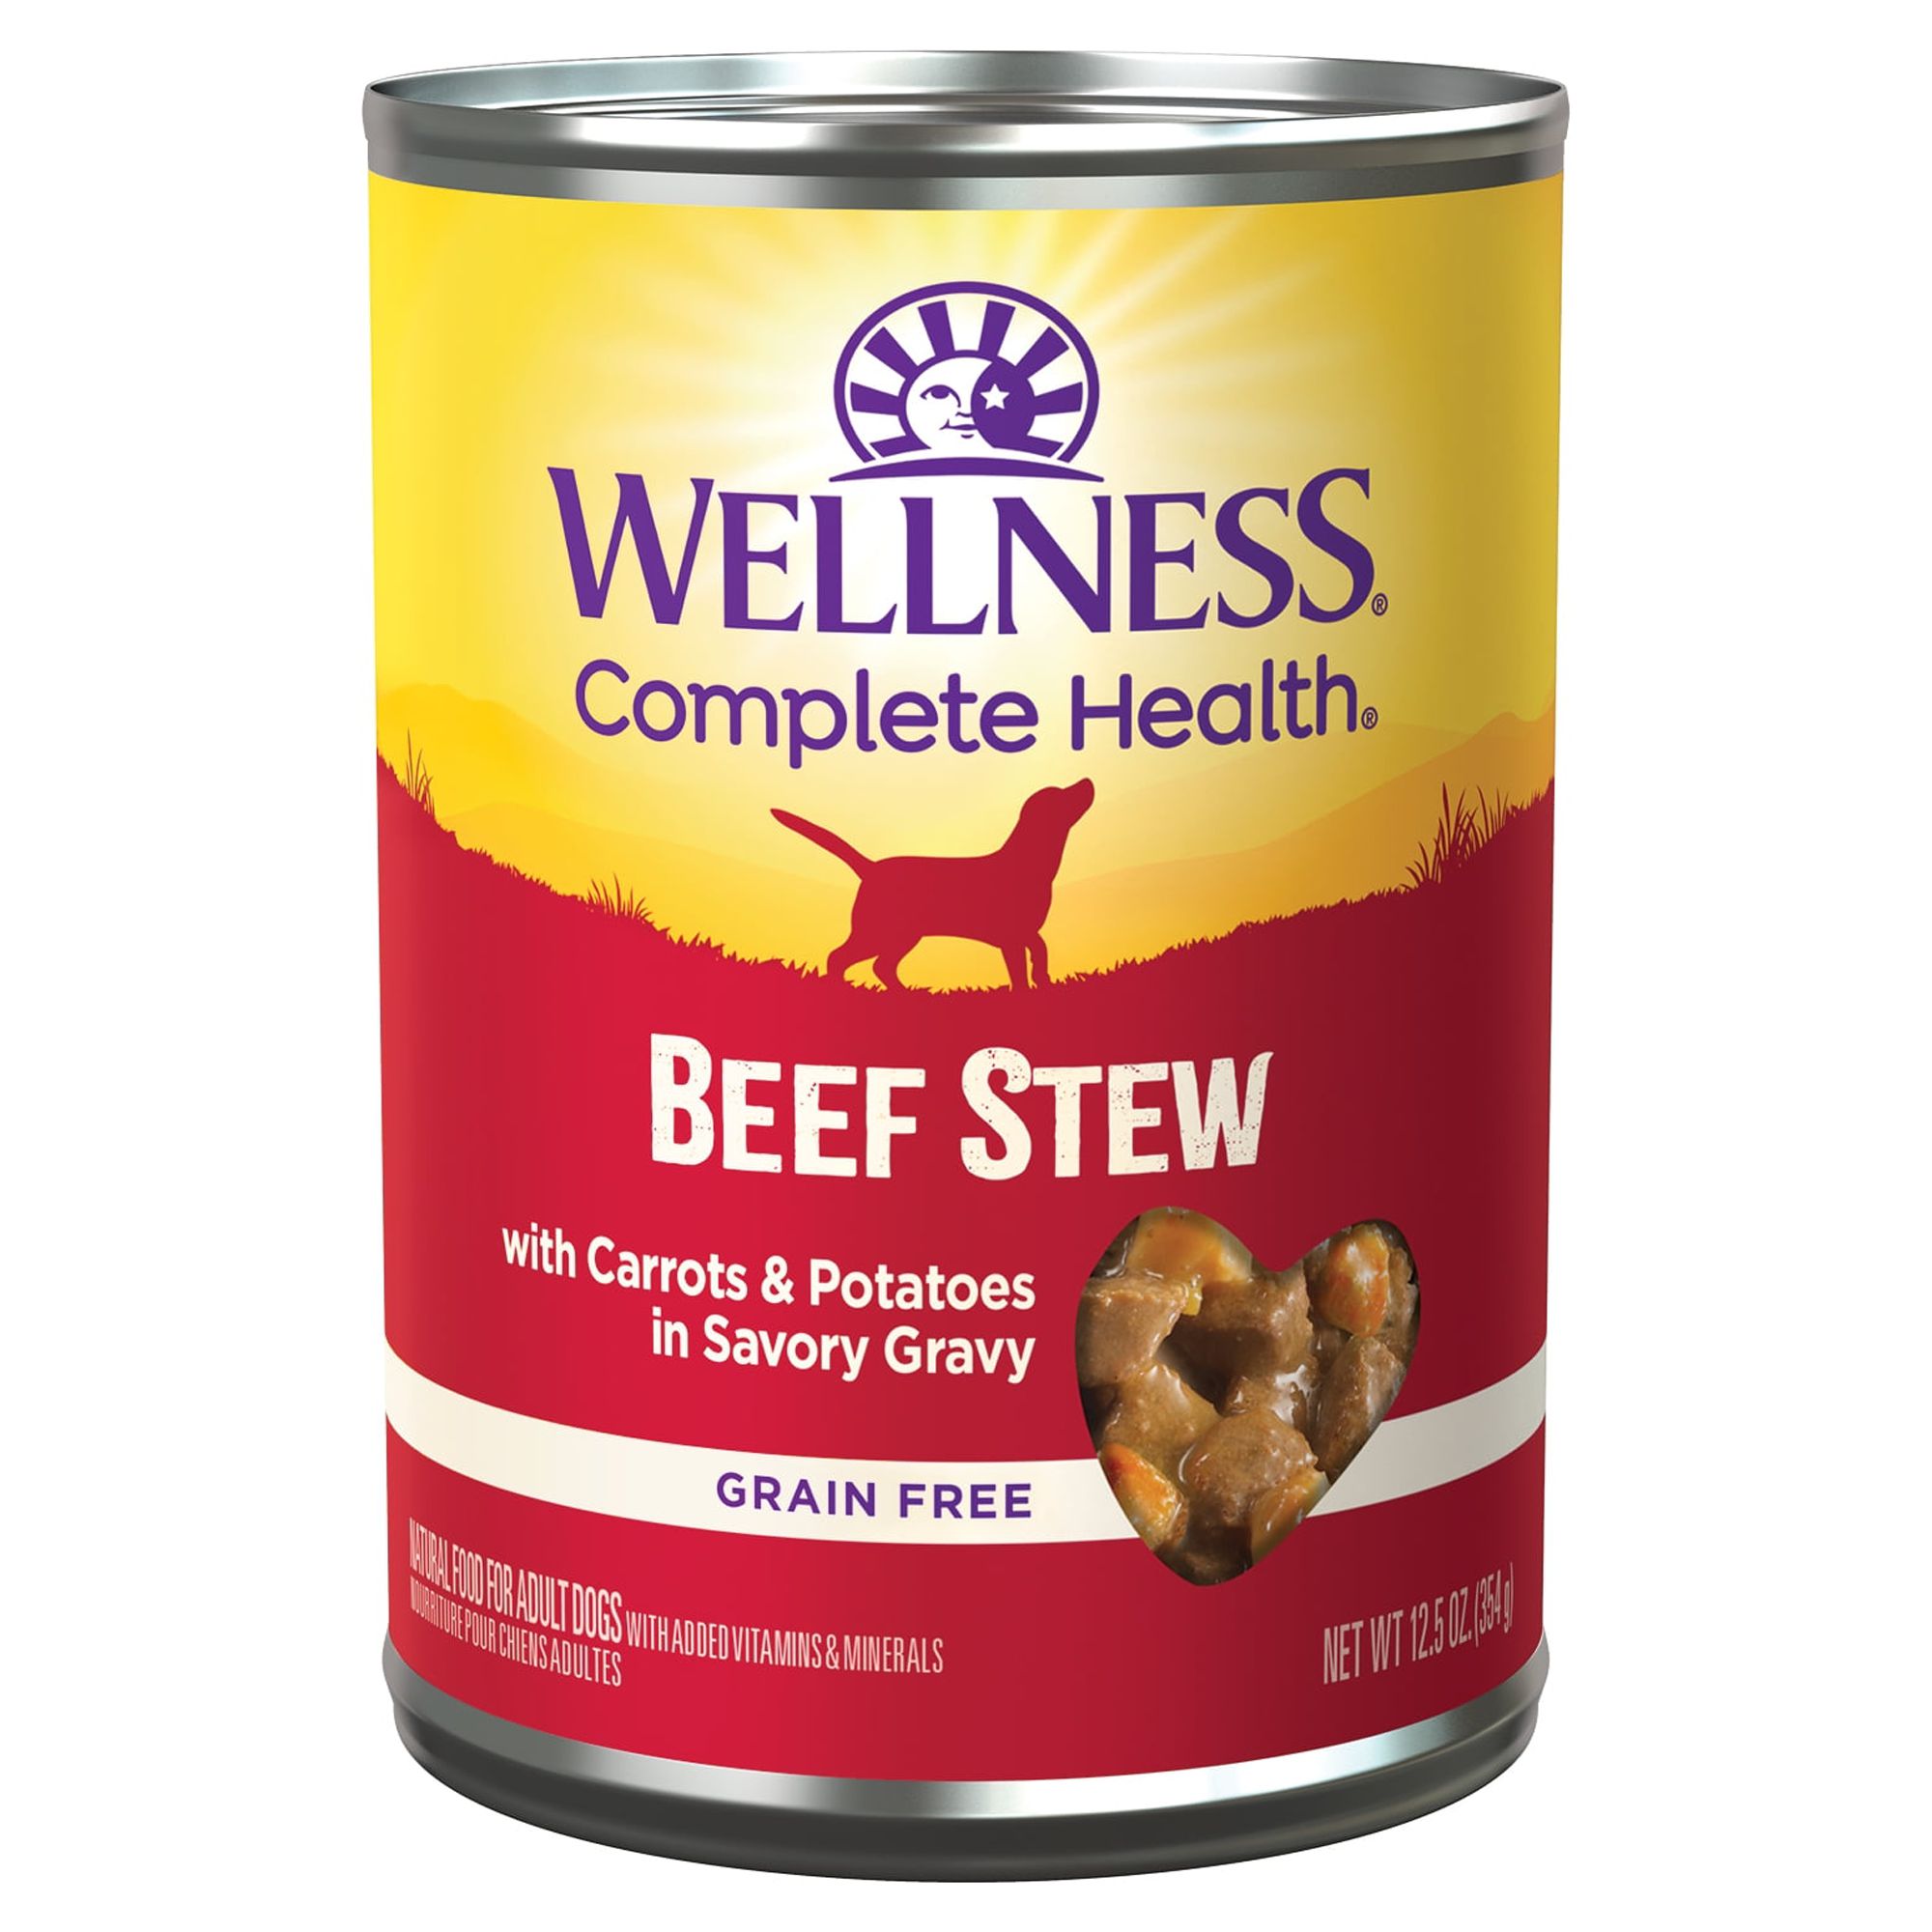 Wellness Thick & Chunky Natural Grain Free Canned Dog Food, Beef Stew, 12.5-Ounce Can (Pack of 12) - image 1 of 7